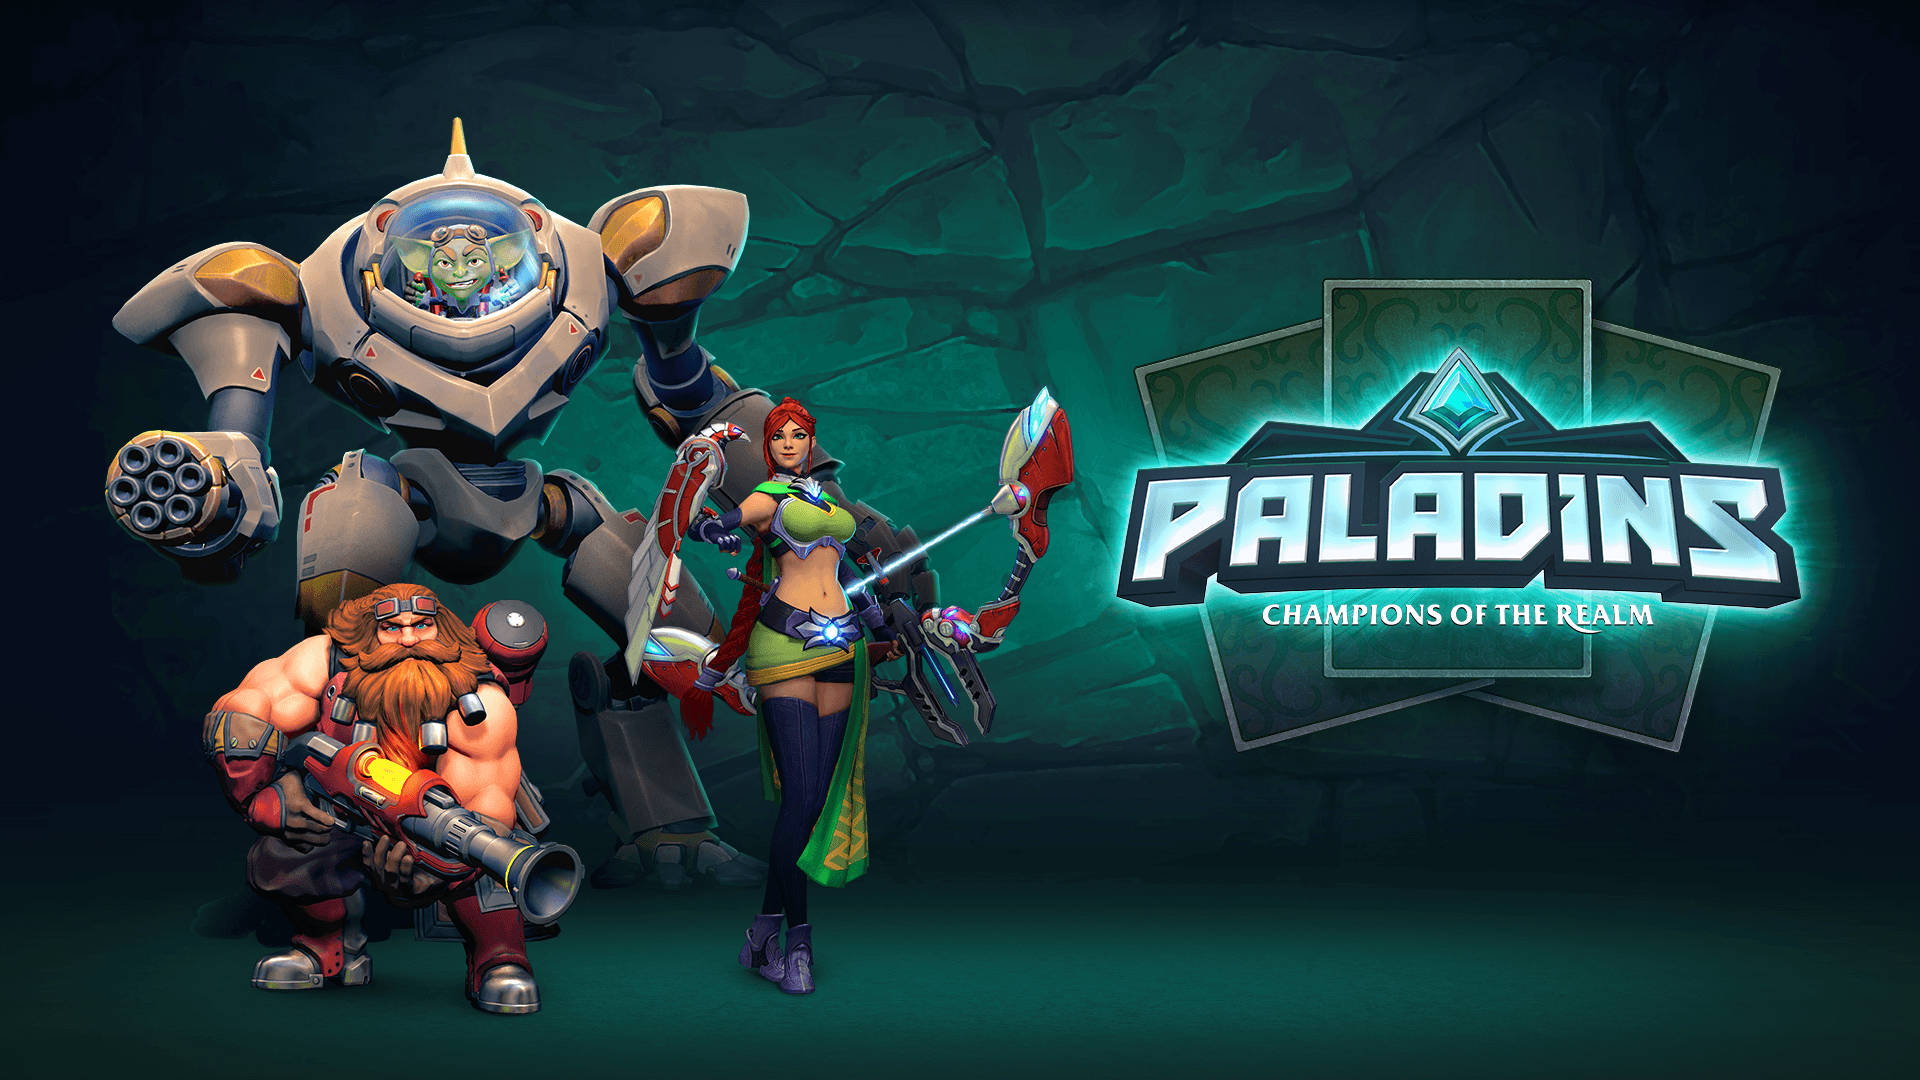 Action-packed showdown featuring Ruckus, Barik and Cassie from Paladins Wallpaper